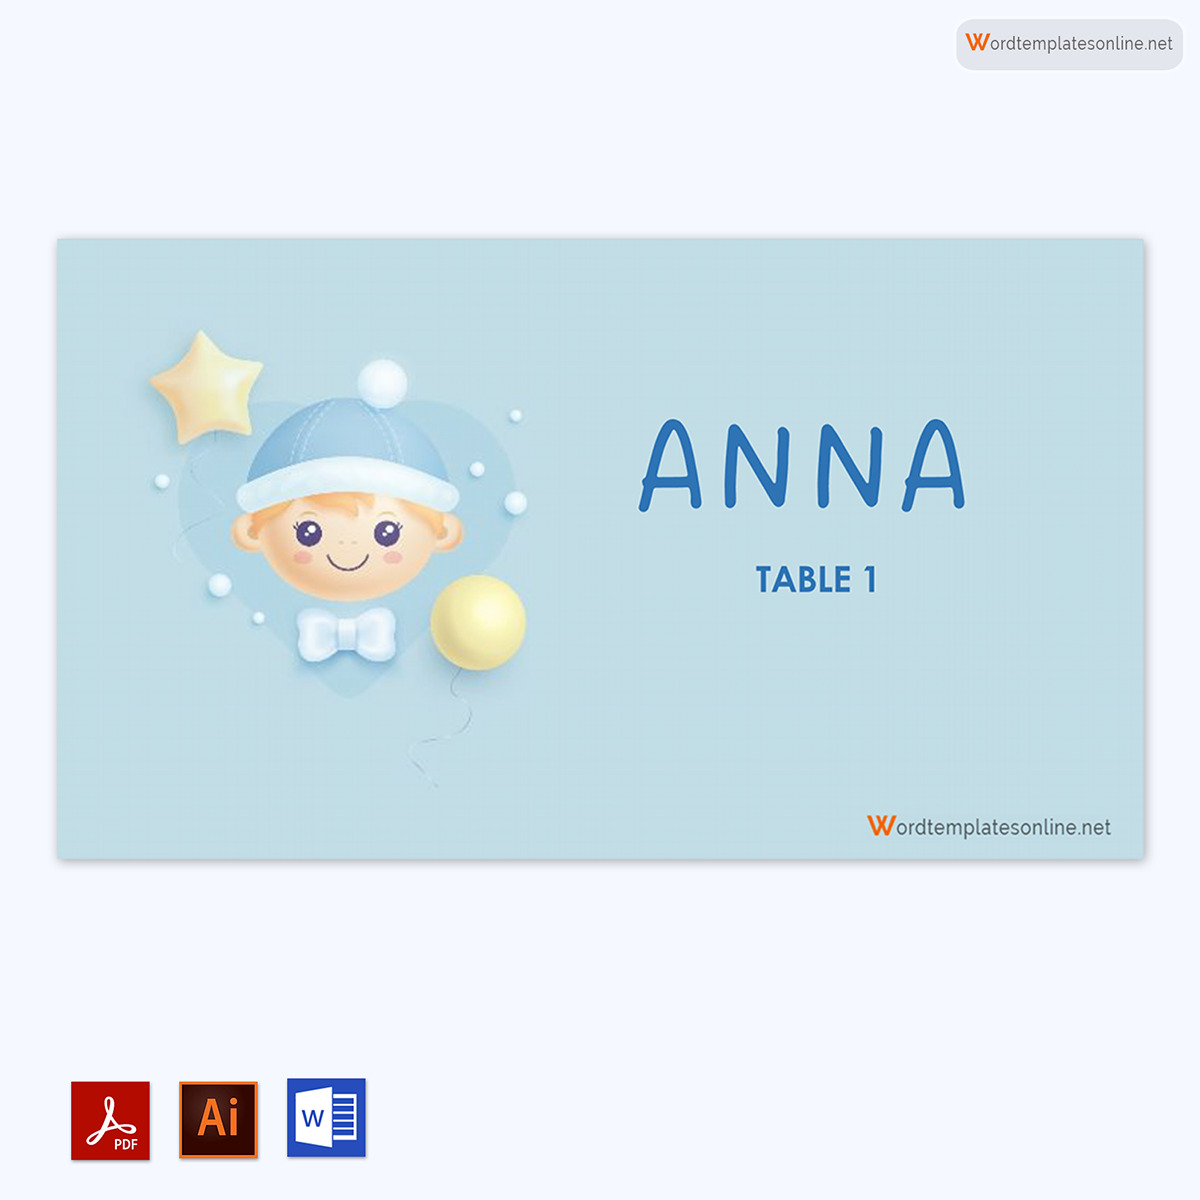 Printable Place Card Template - Ready-to-Print Example